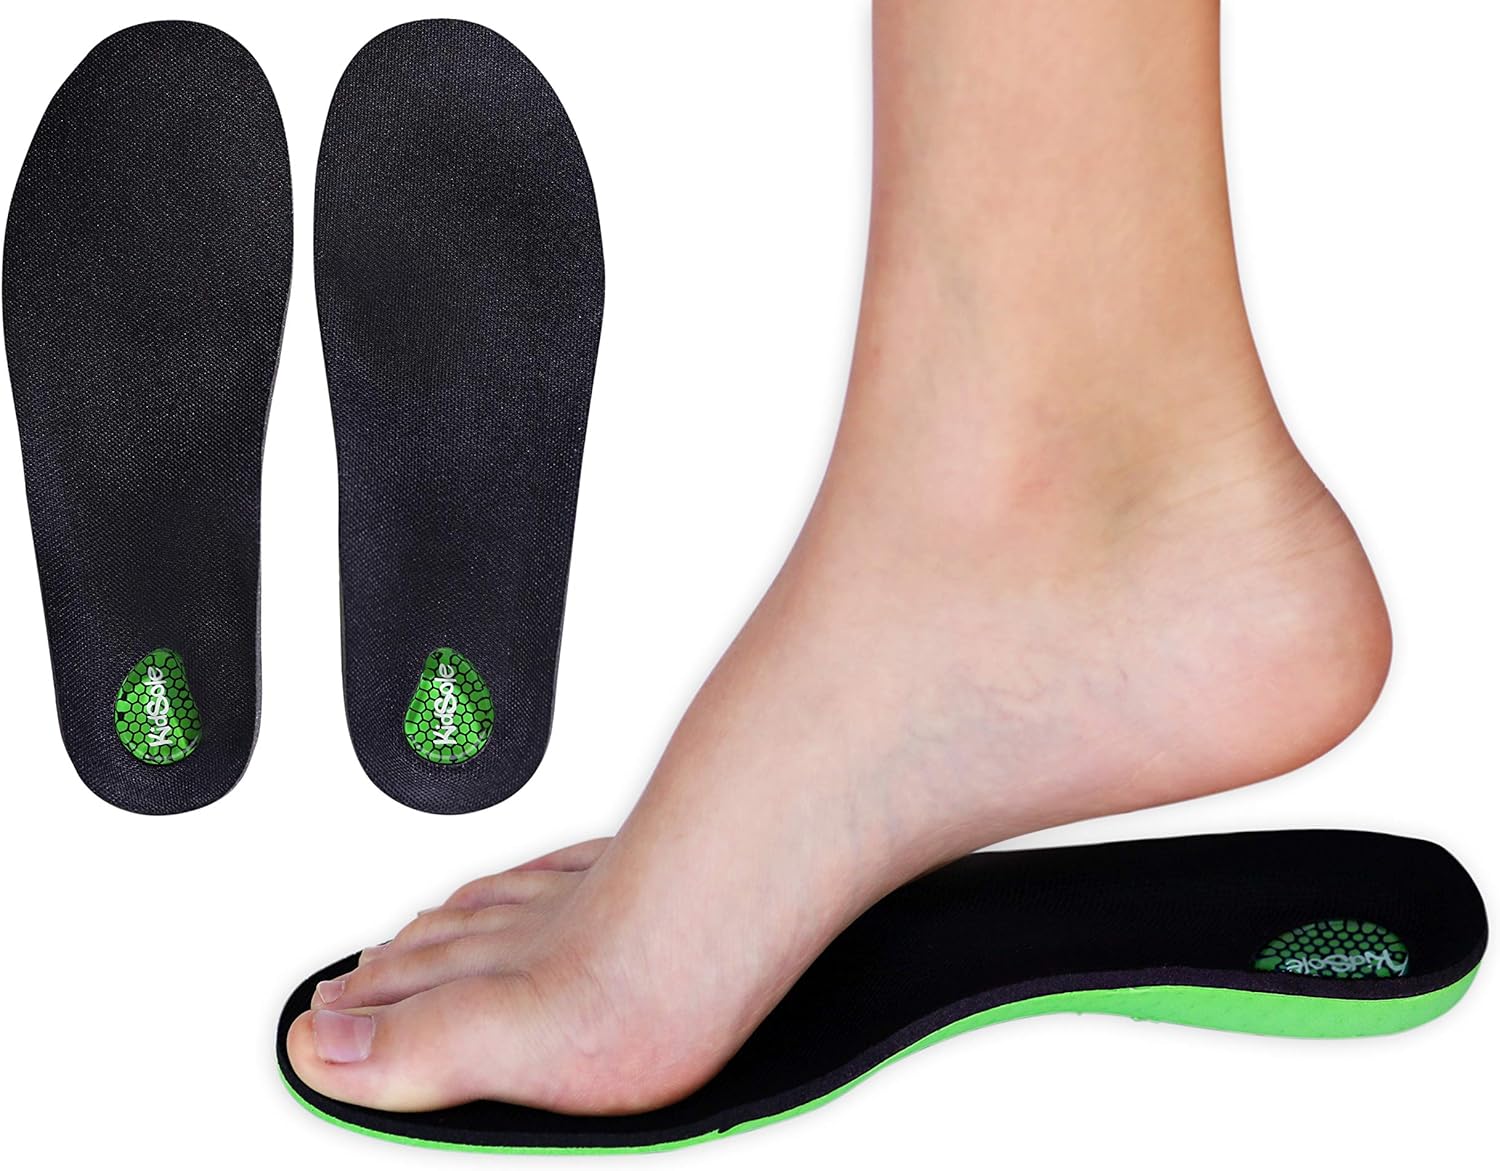 KidSole Green Martian: Arch Support Soft  Strong Insole. Slim  Lightweight Design with Memory Foam Top. ((24 CM) Kids Size 3-6)